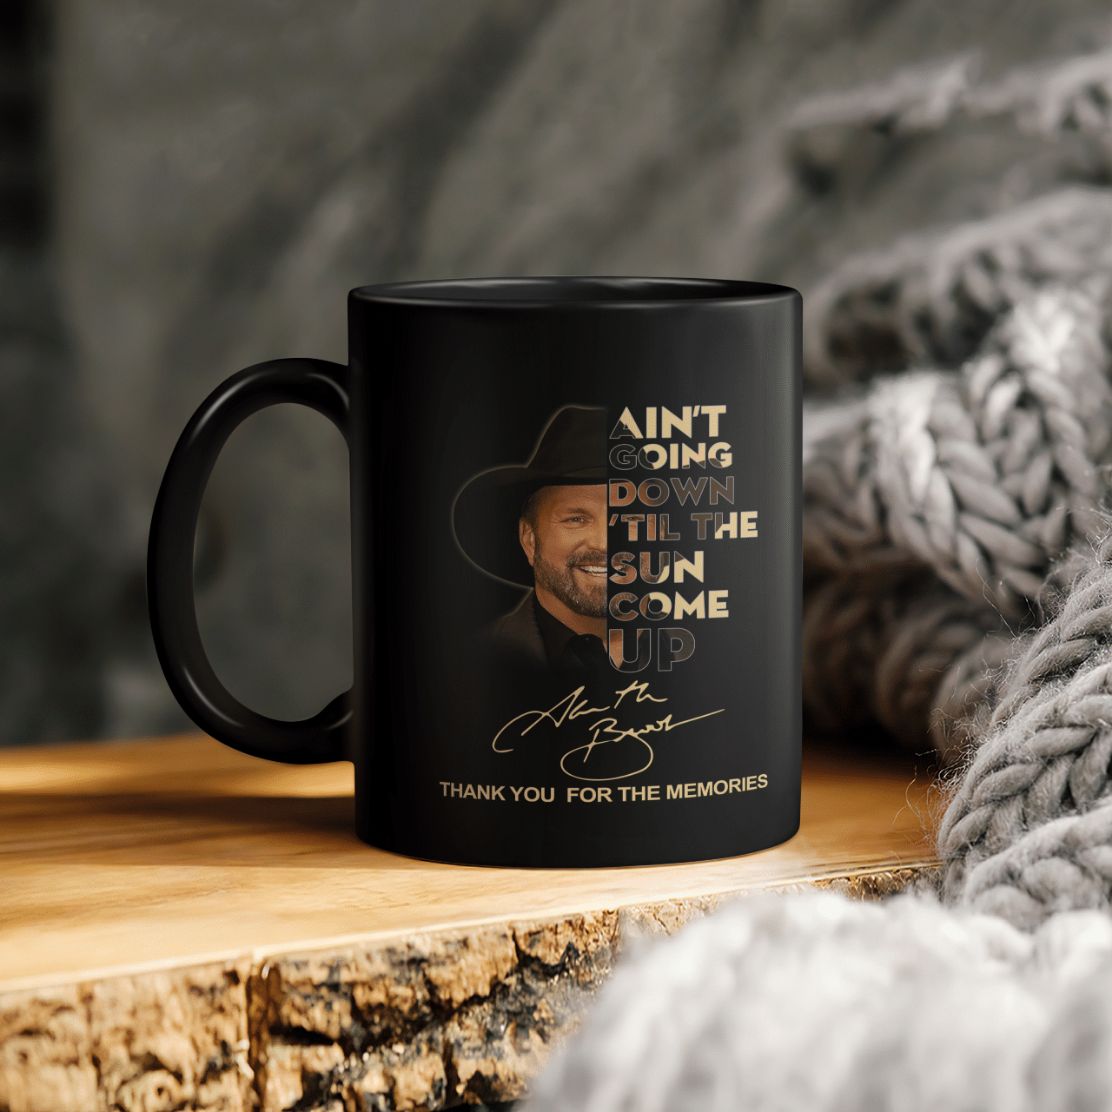 Ain’t Going Down Til The Sun Come Up Garth Brooks Signature Thank You For The Memories Ceramic Coffee Mug